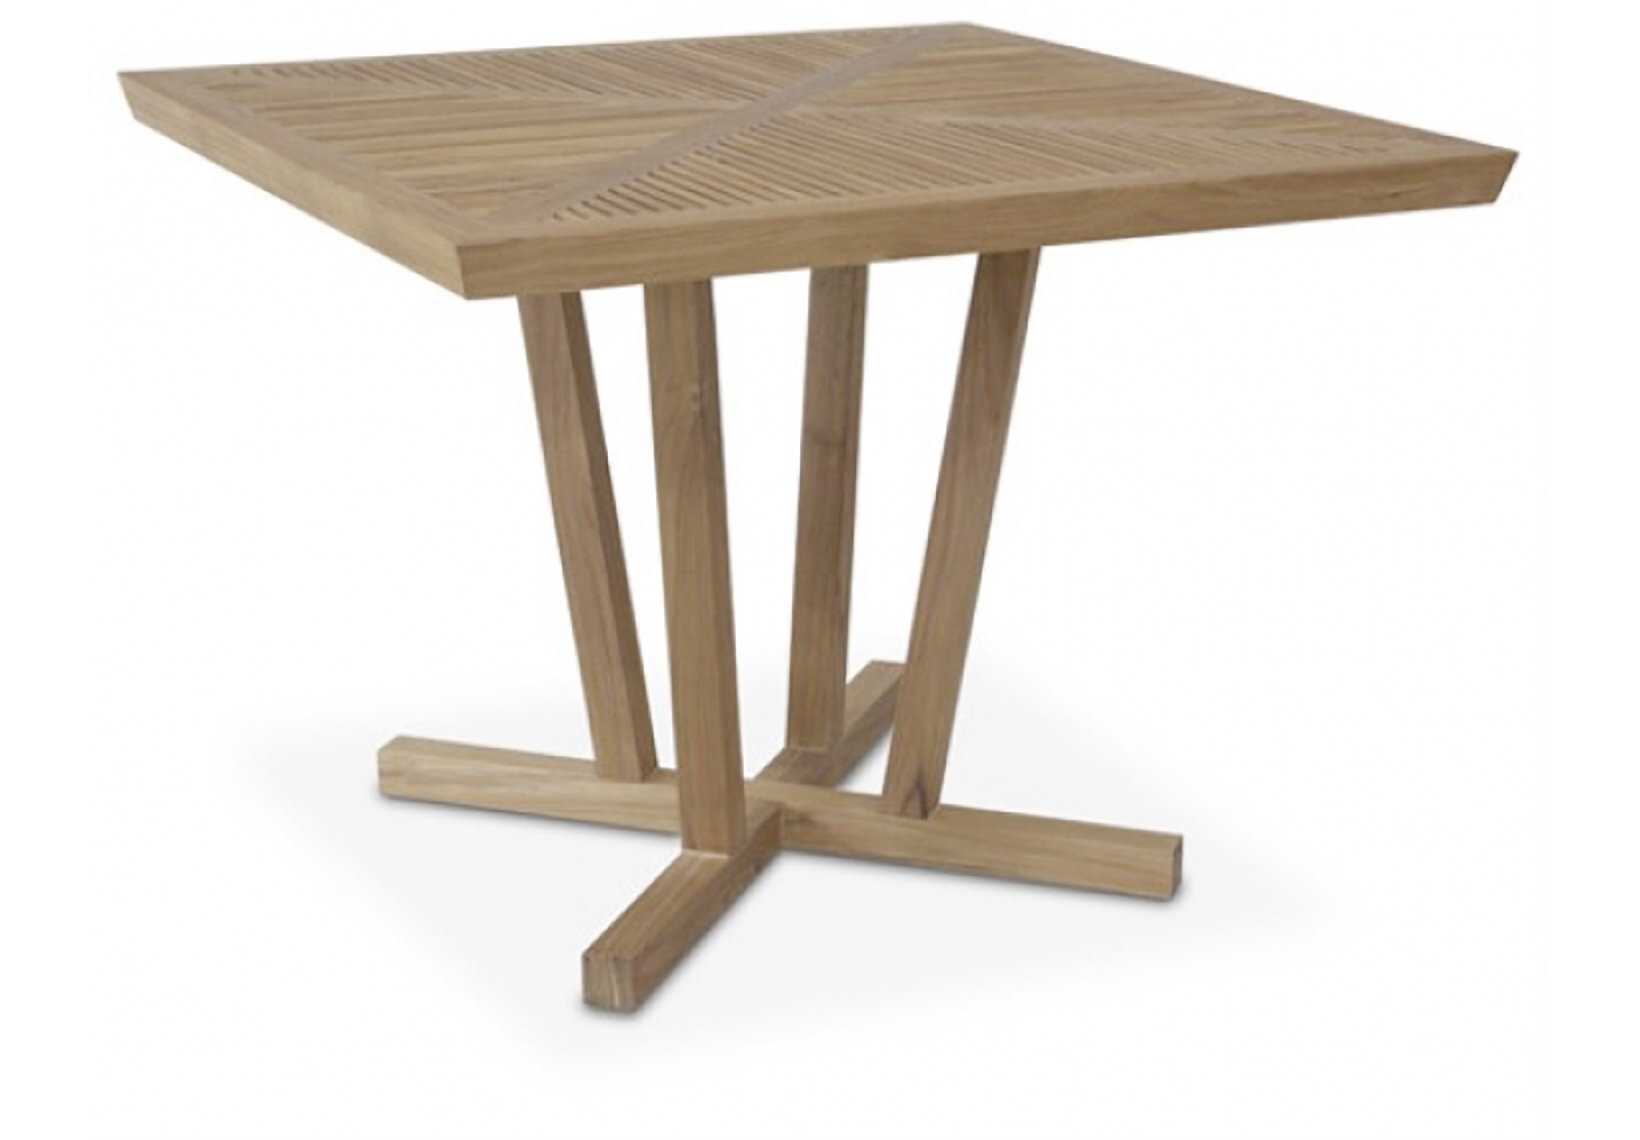 Spavision | Korogated Square Dining Table